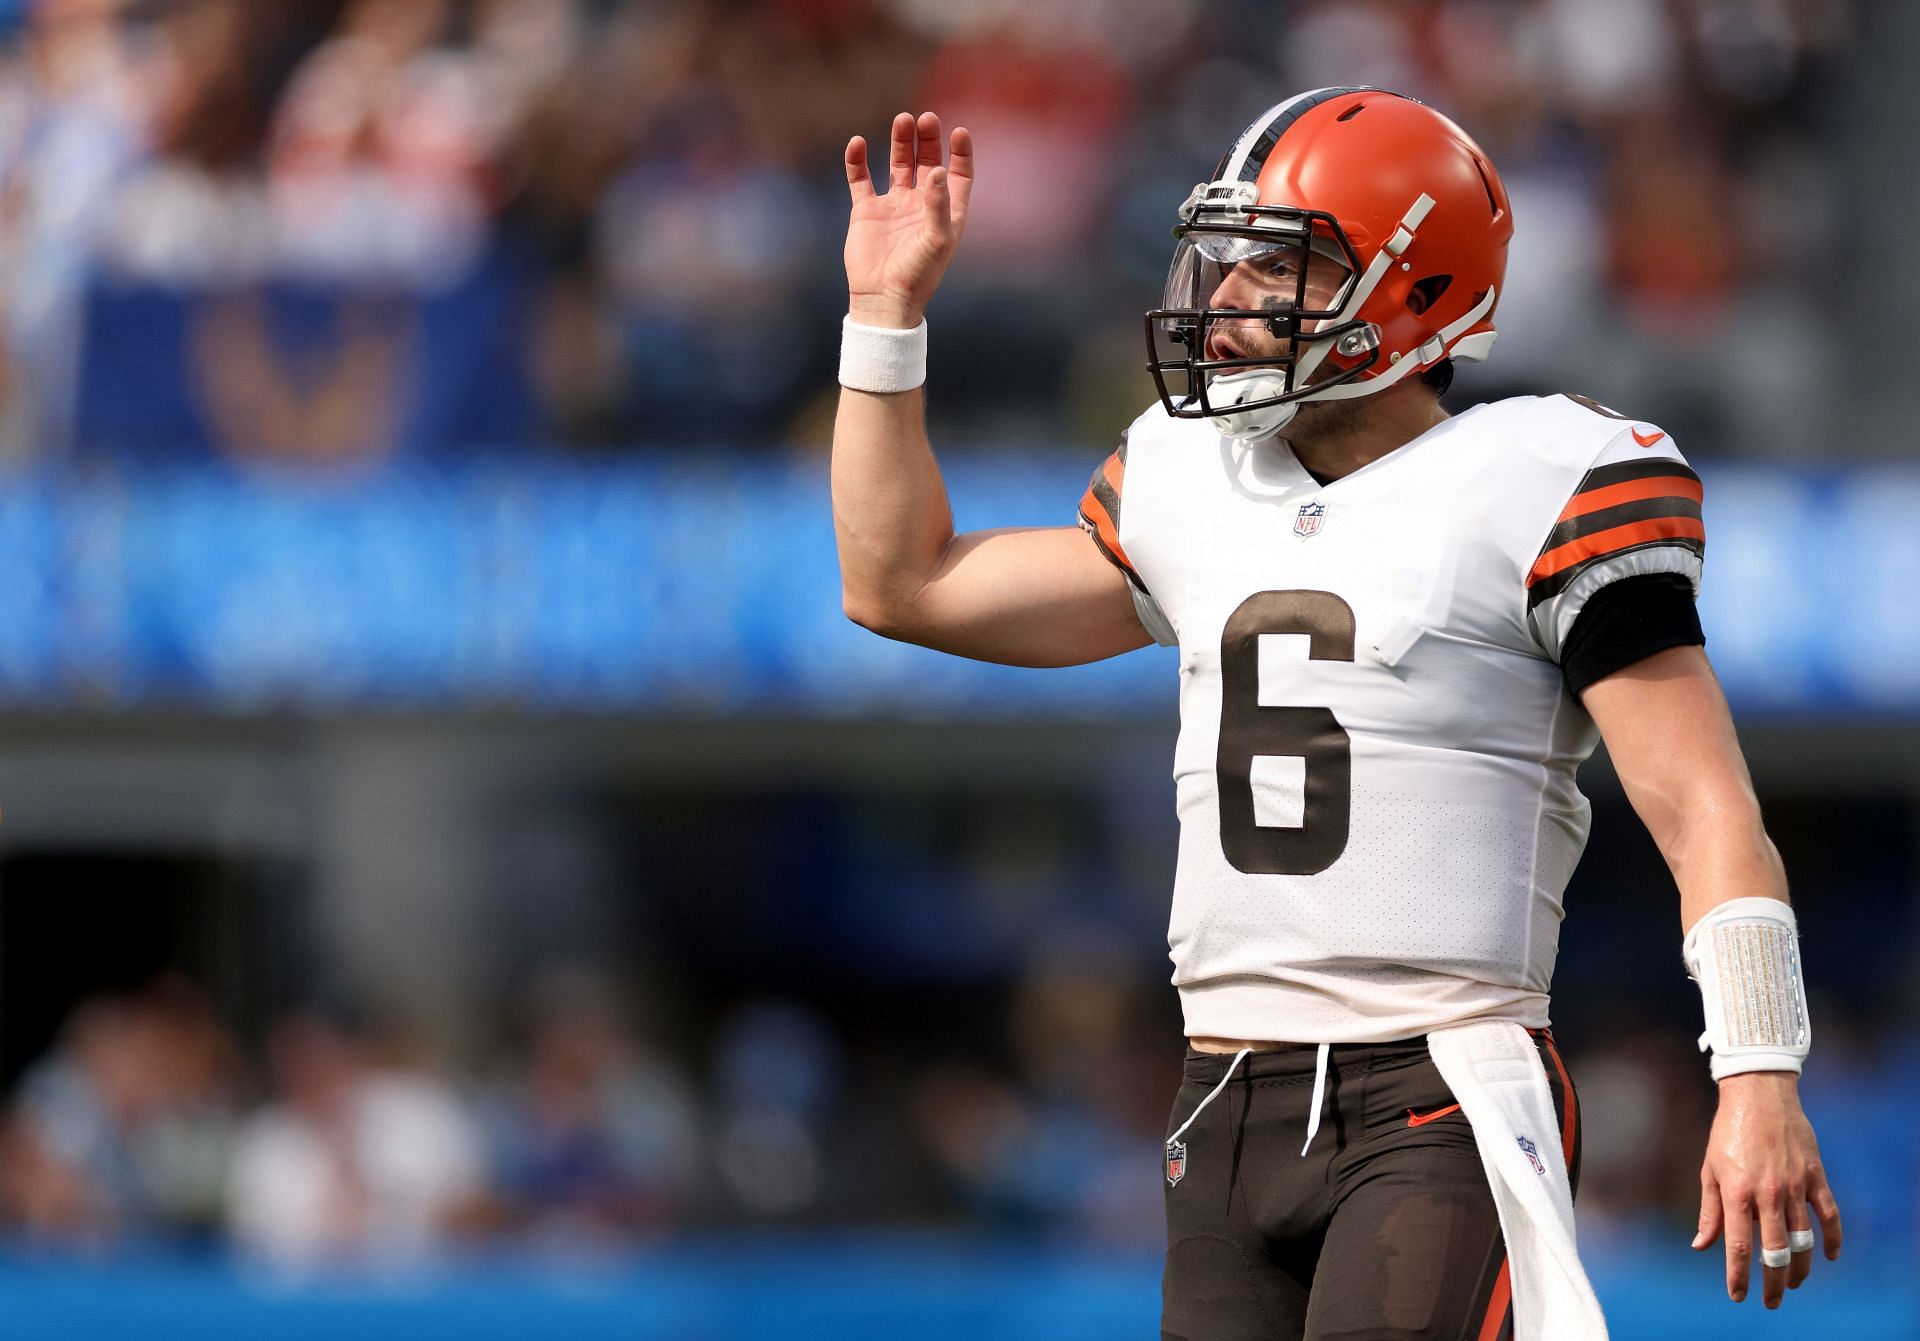 As long as the Browns have Baker Mayfield on the roster, their QB room is elite on paper